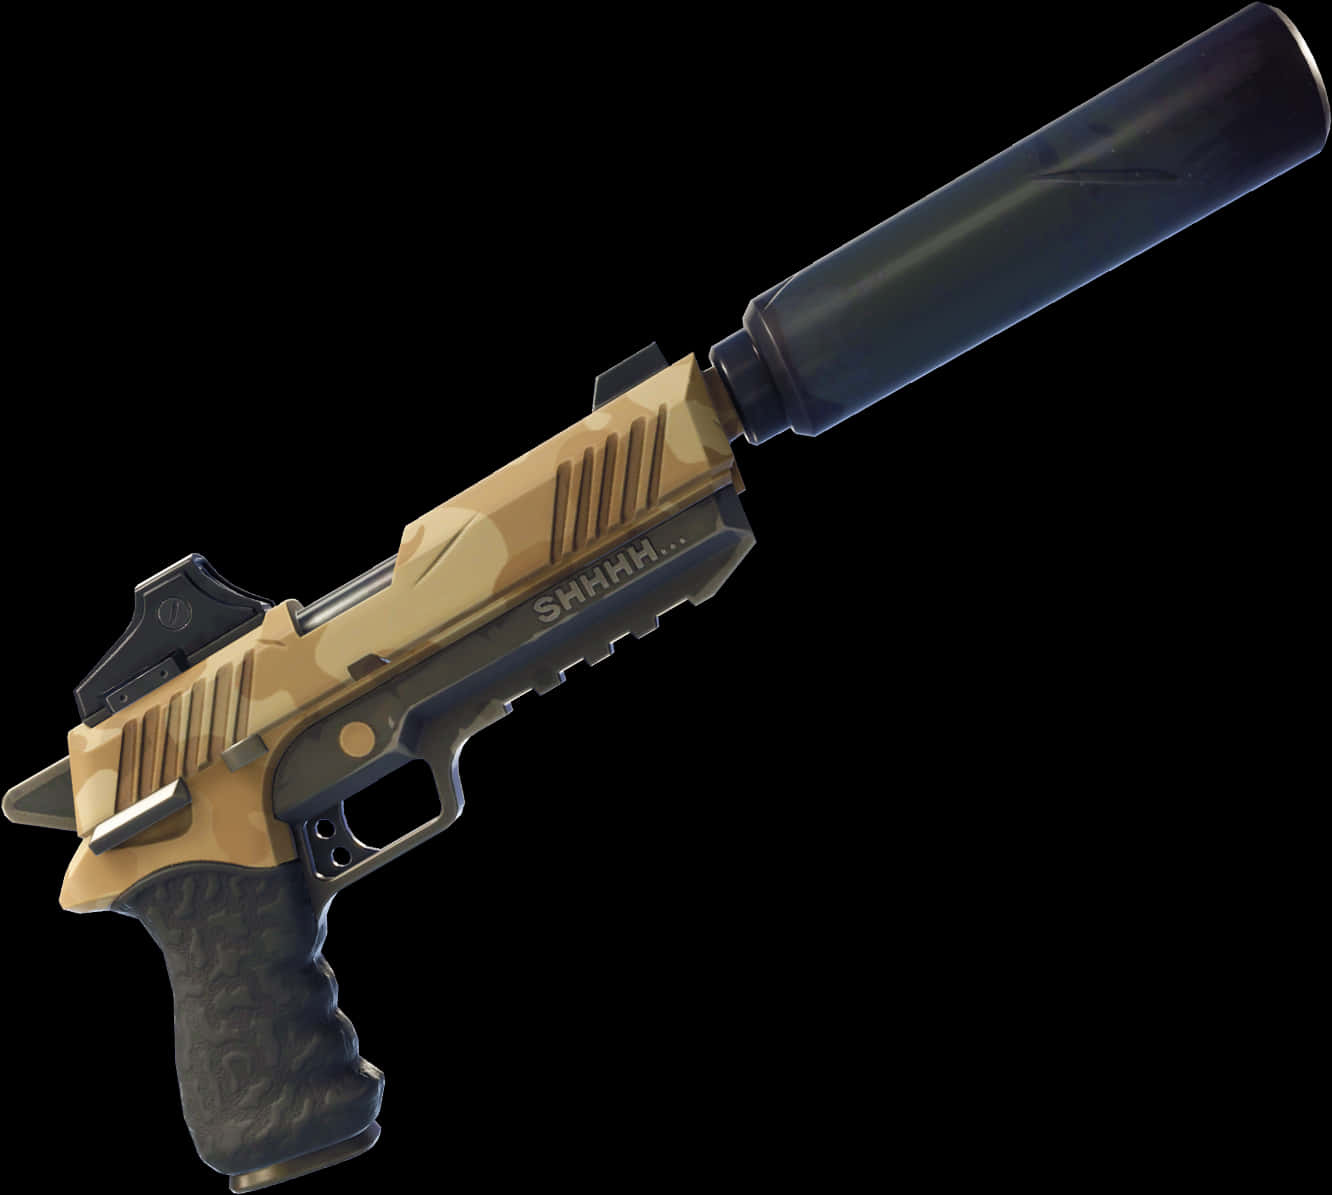 A Gold And Black Gun With A Black Barrel